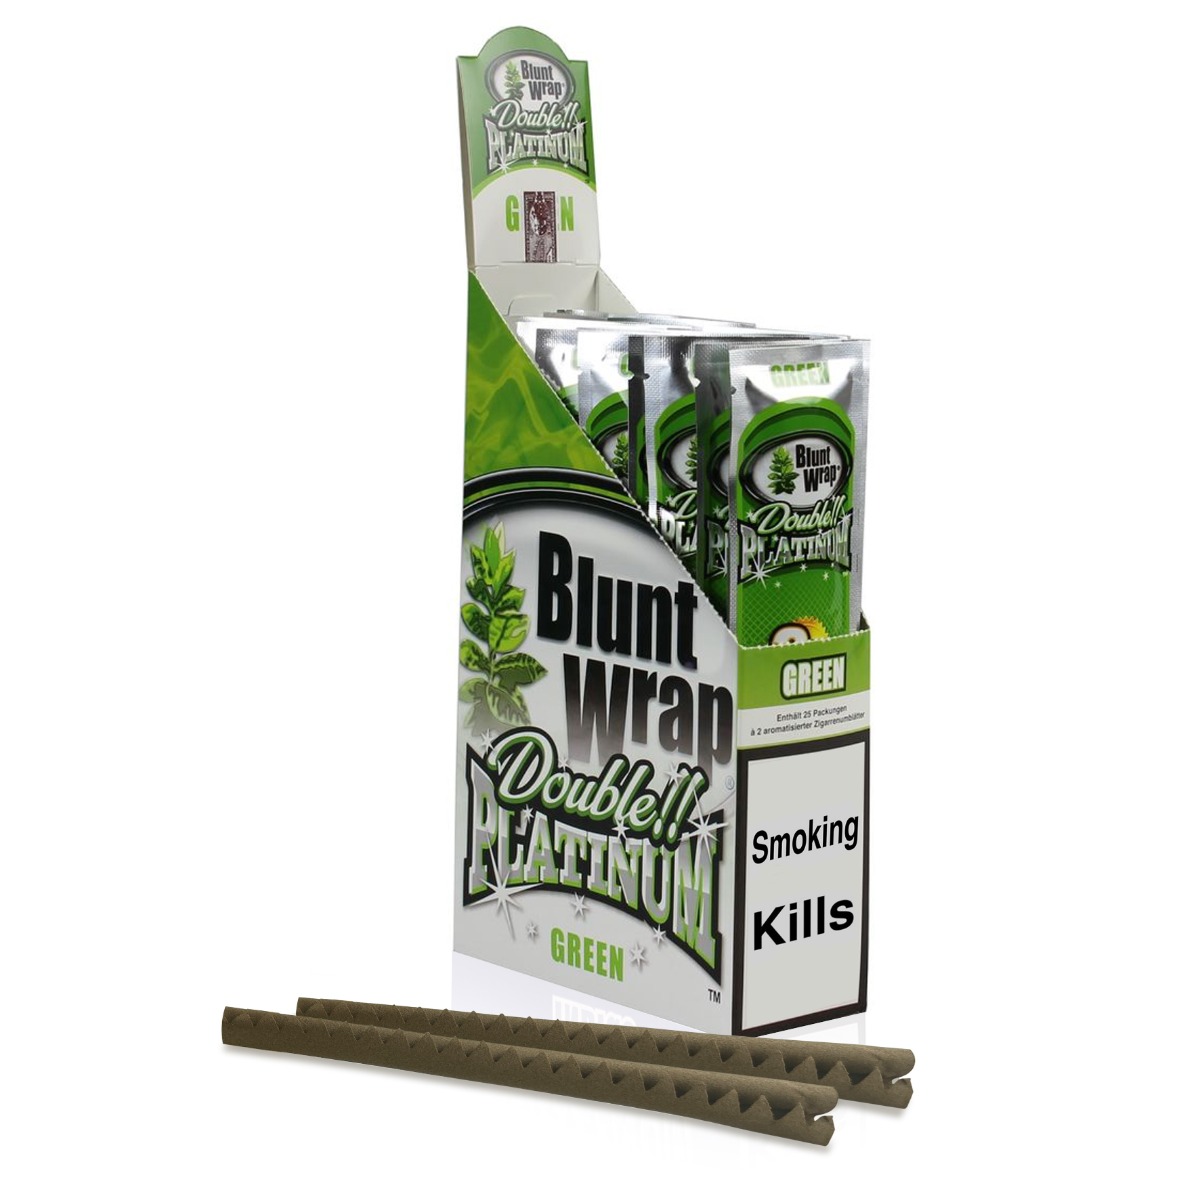 Blunt wrap double platinum - Green (Previously apple martini) - pack of 2 